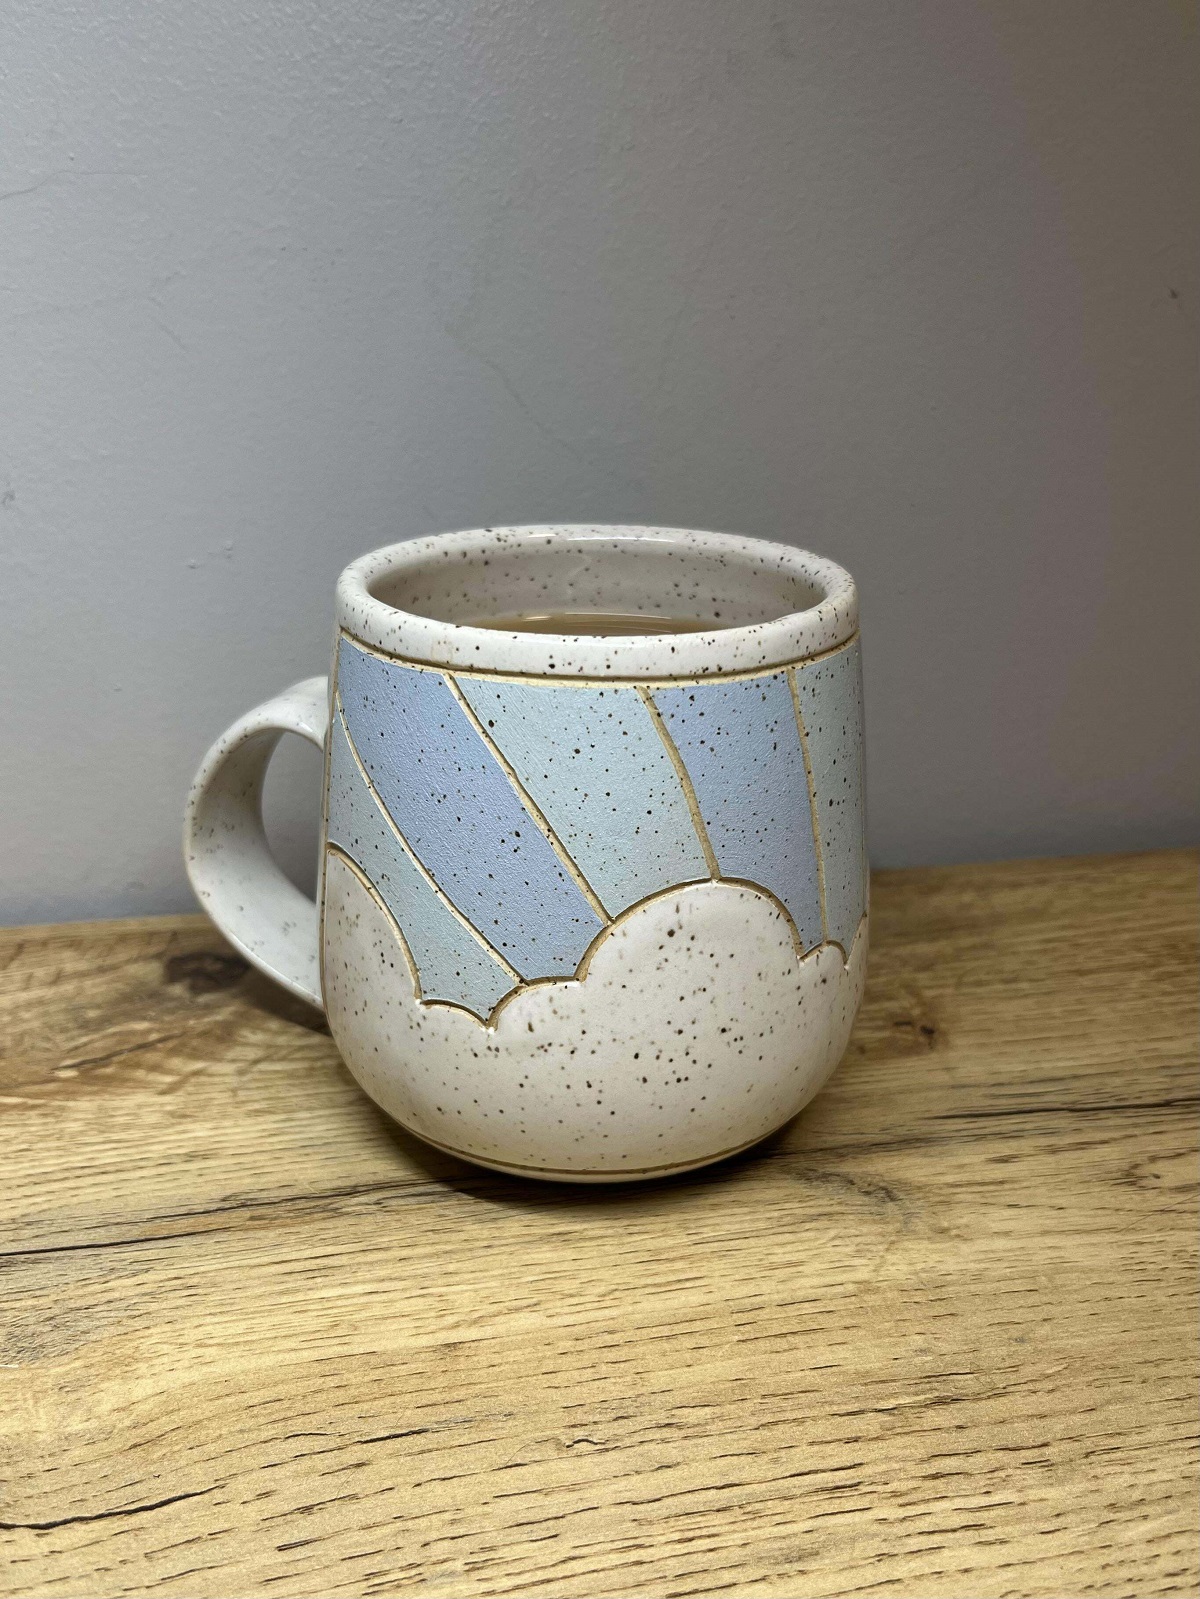 Bad News, My Shelf Broke, And All Of My Mugs Shattered. Good News, It Gave Me An Excuse To Order This Beauty